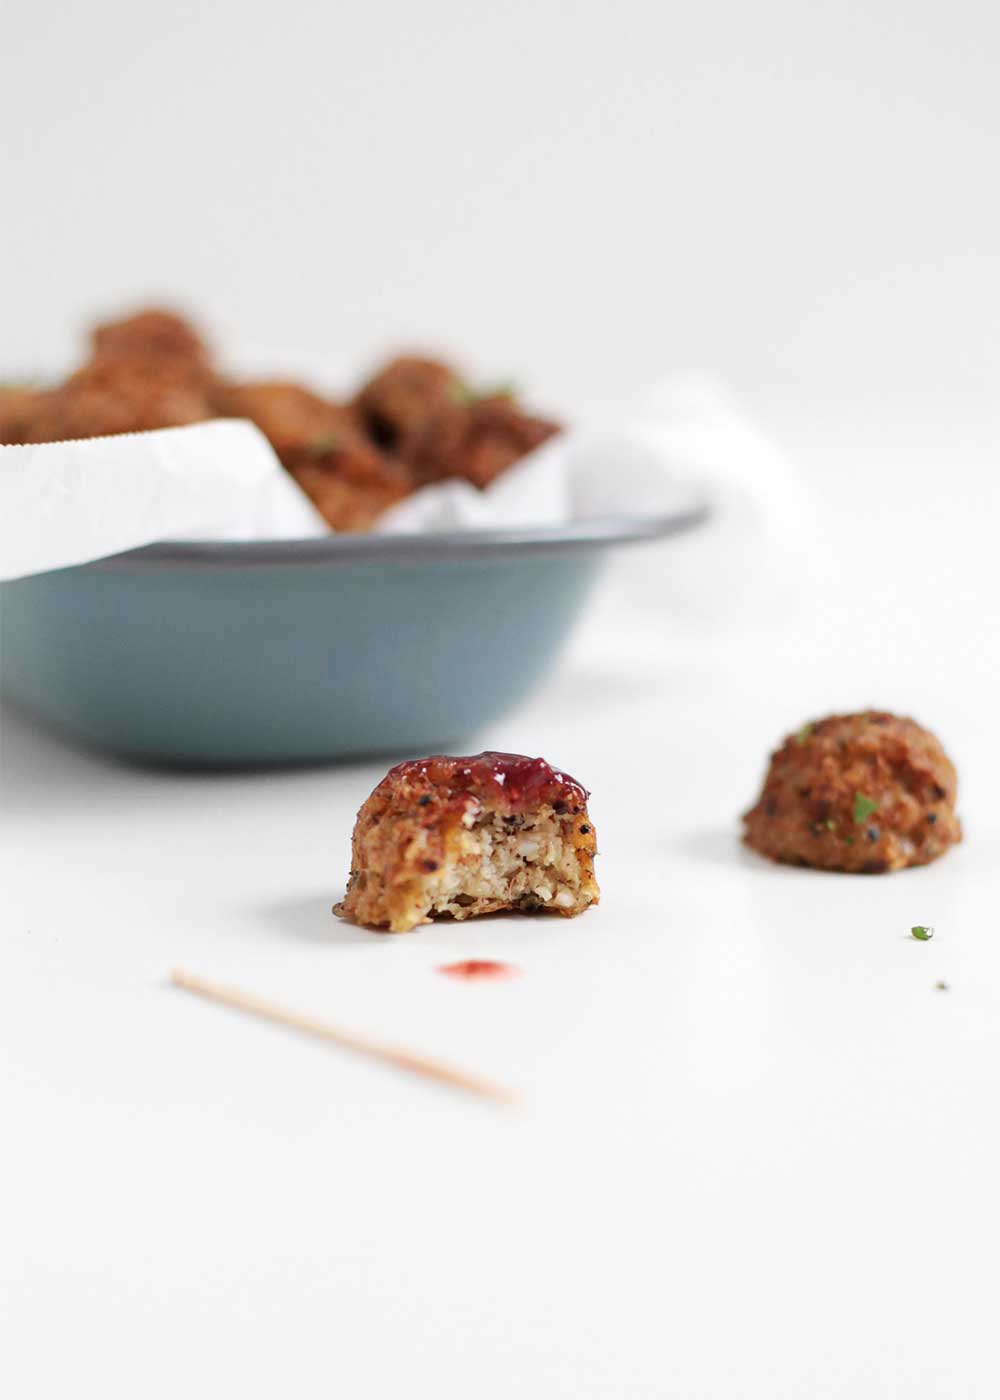 Vegetarian Swedish Meatballs with a lingonberry sauce from The Fauxmartha